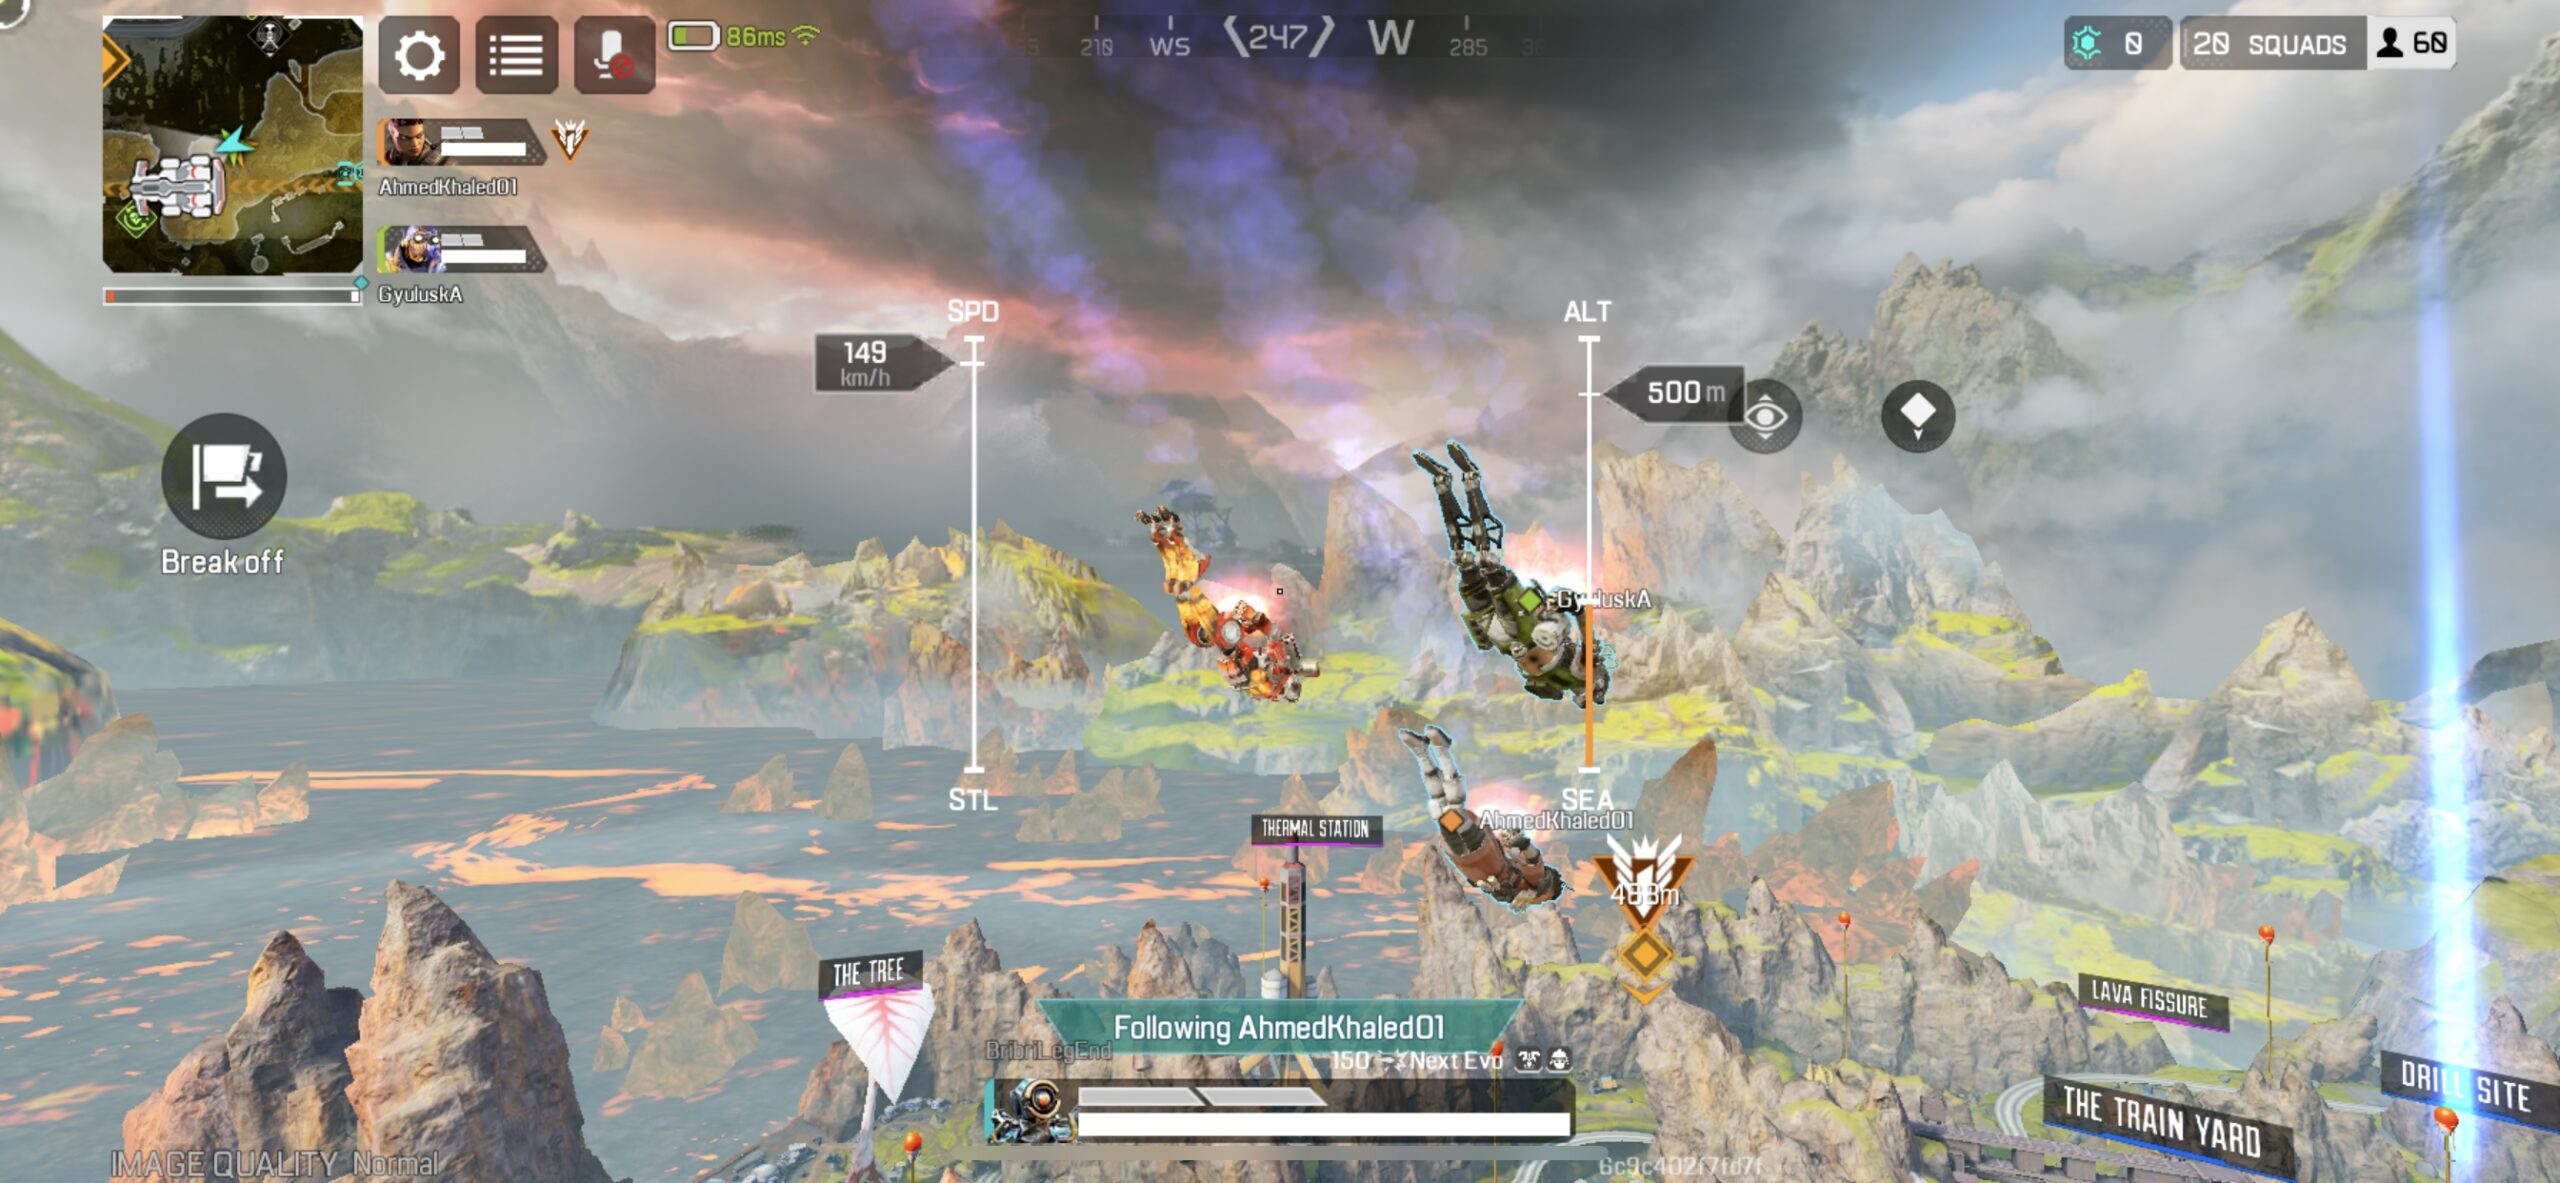 Apex Legends Mobile Review – The Best Battle Royale on Mobile?